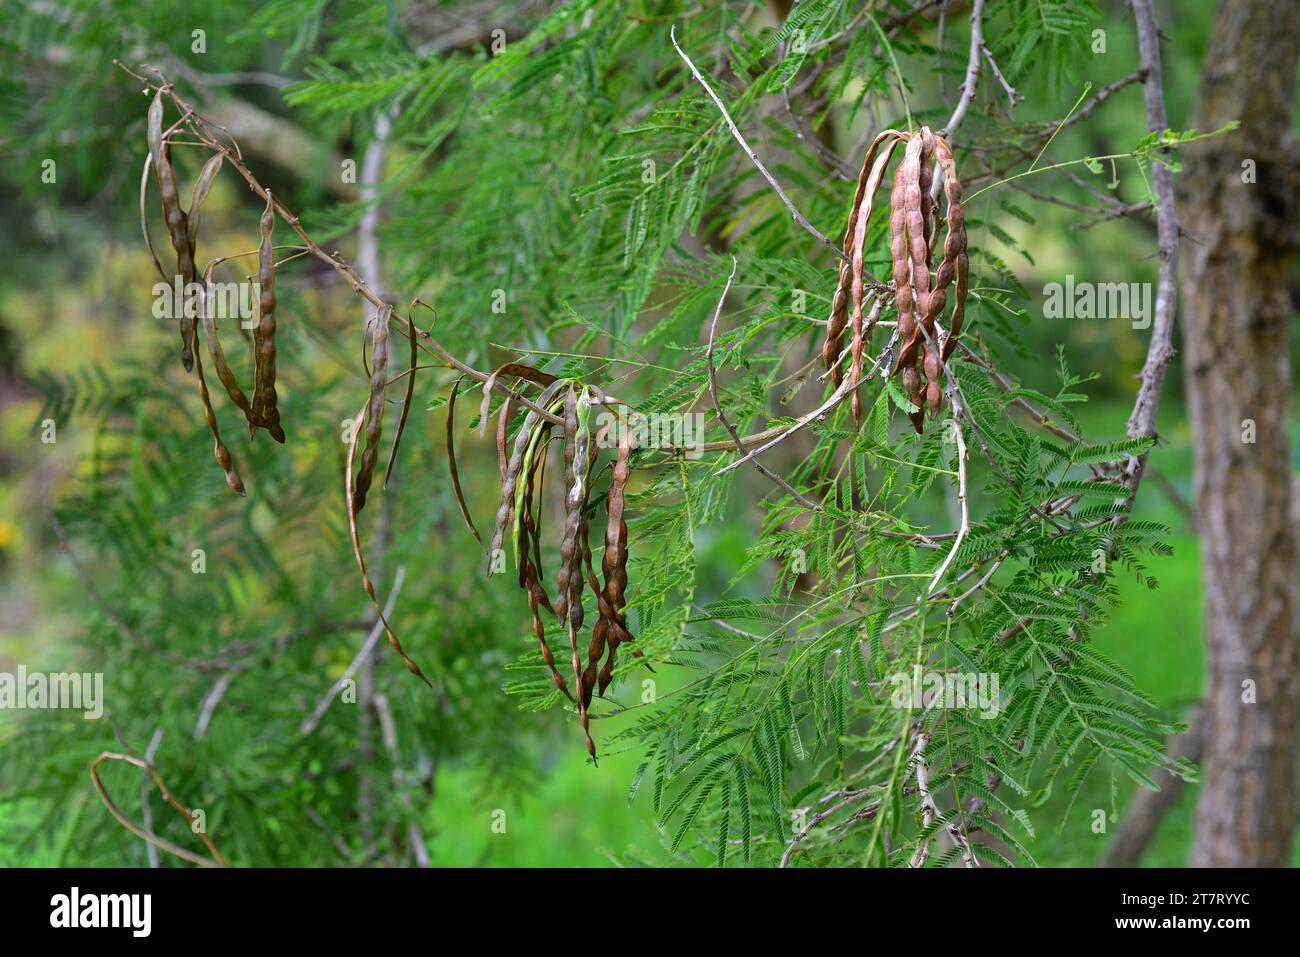 Cork thorn tree (Acacia davyi) is an evergreen small tree native to southern Africa. Fruits and leaves detail. Stock Photo